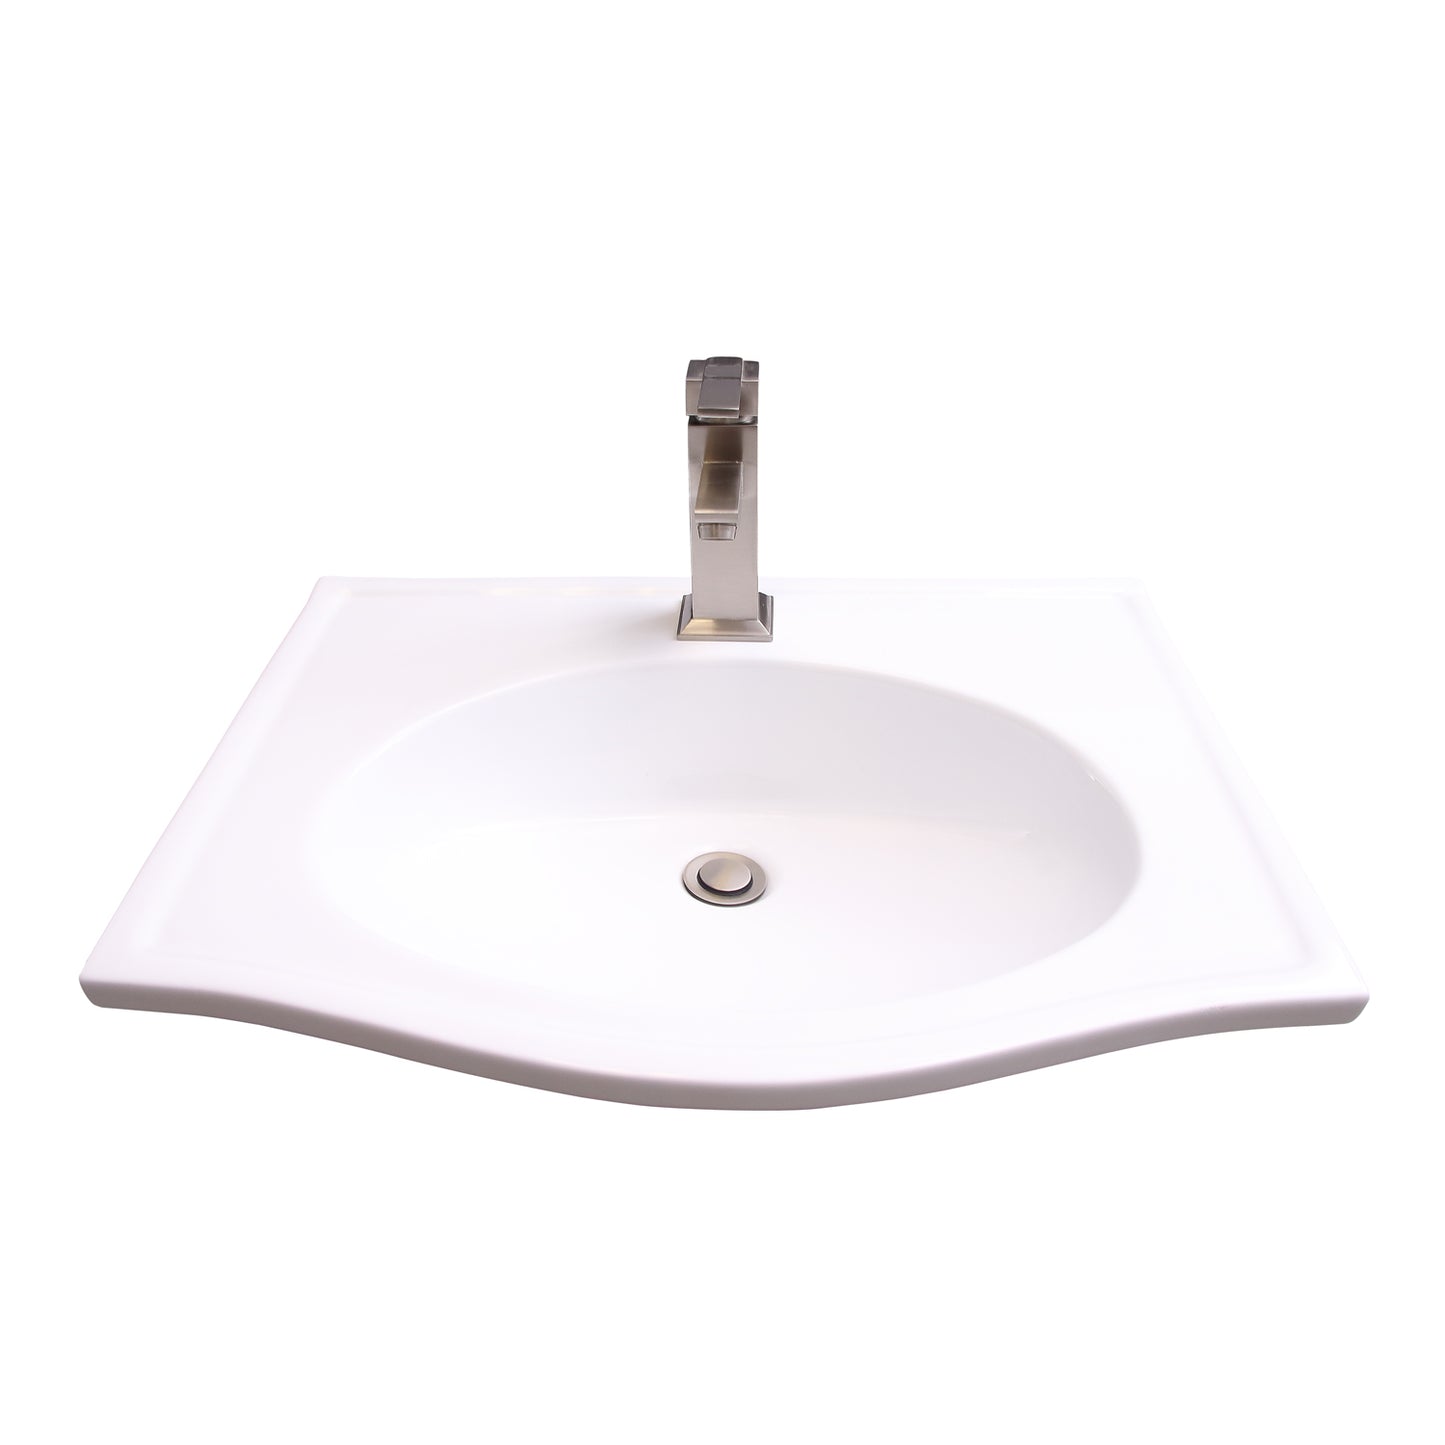 Carlisle Wall Hung 24 1/2" Bathroom Sink No Faucet Holes in White